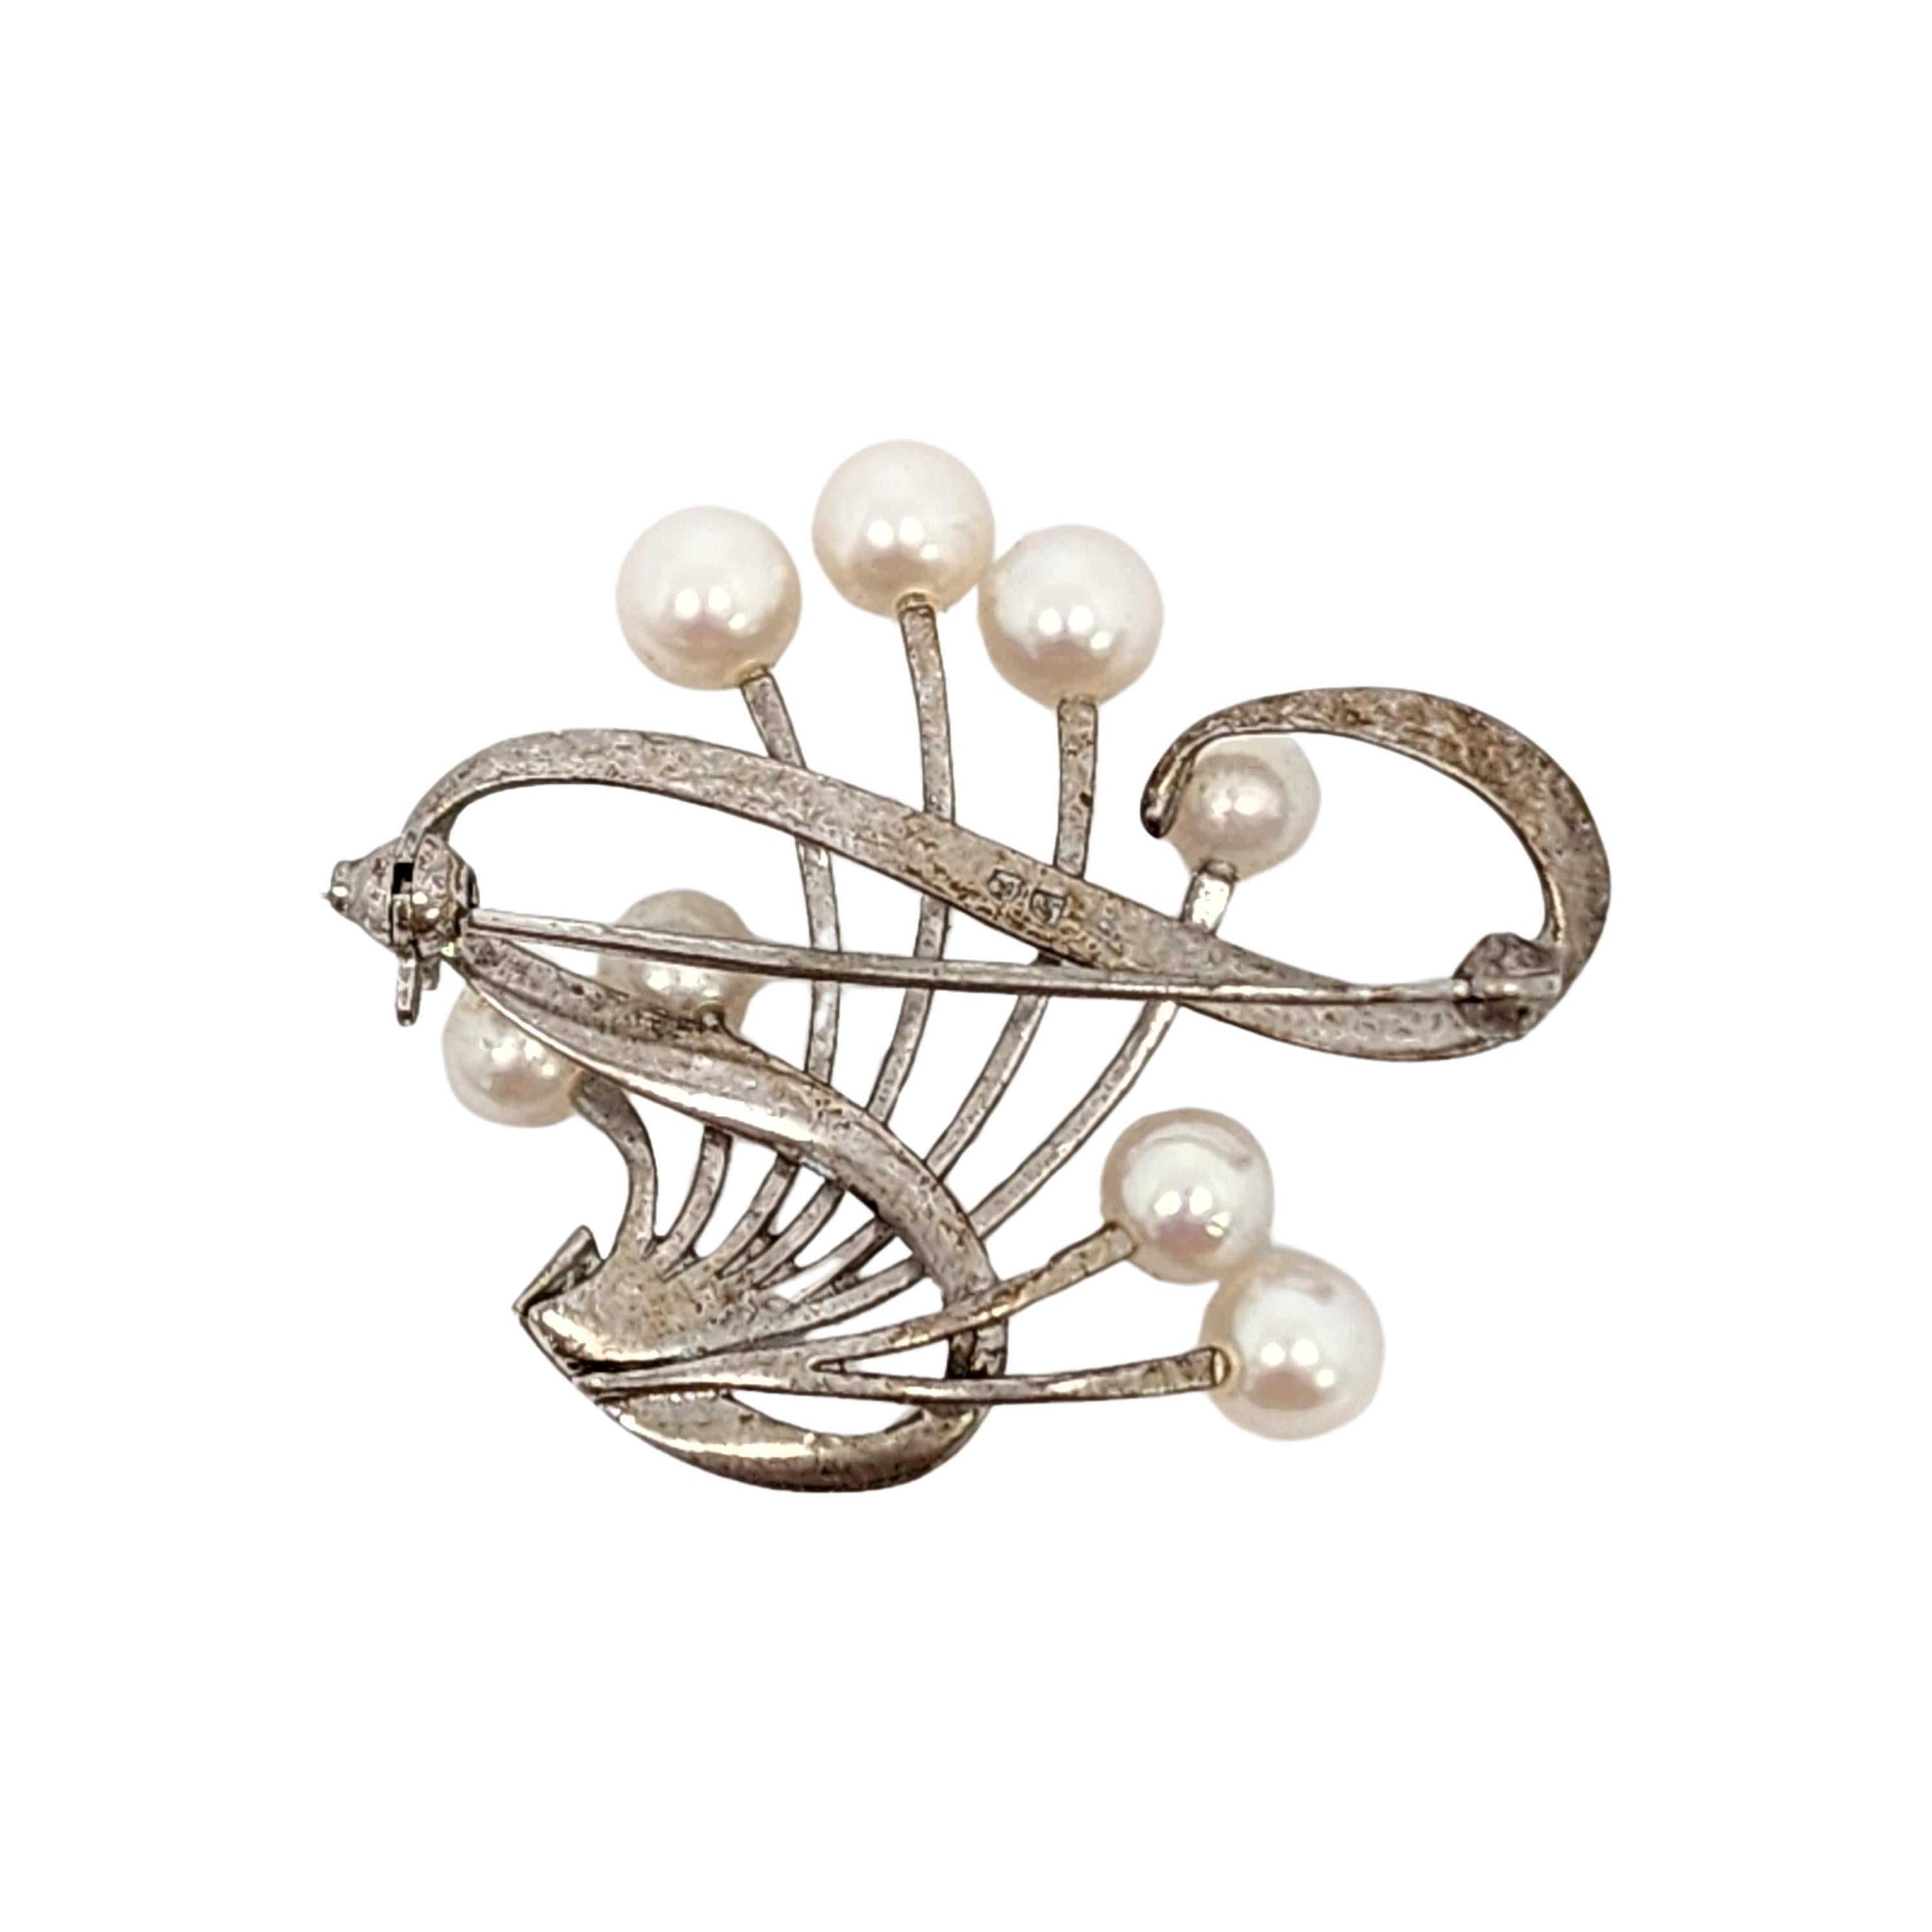 Sterling silver Akoya pearl pin by Mikimoto.

Beautiful design featuring 8 pearls and a scroll ribbon accent. Ball clasp and hinge.

Measures approx 1 1/8